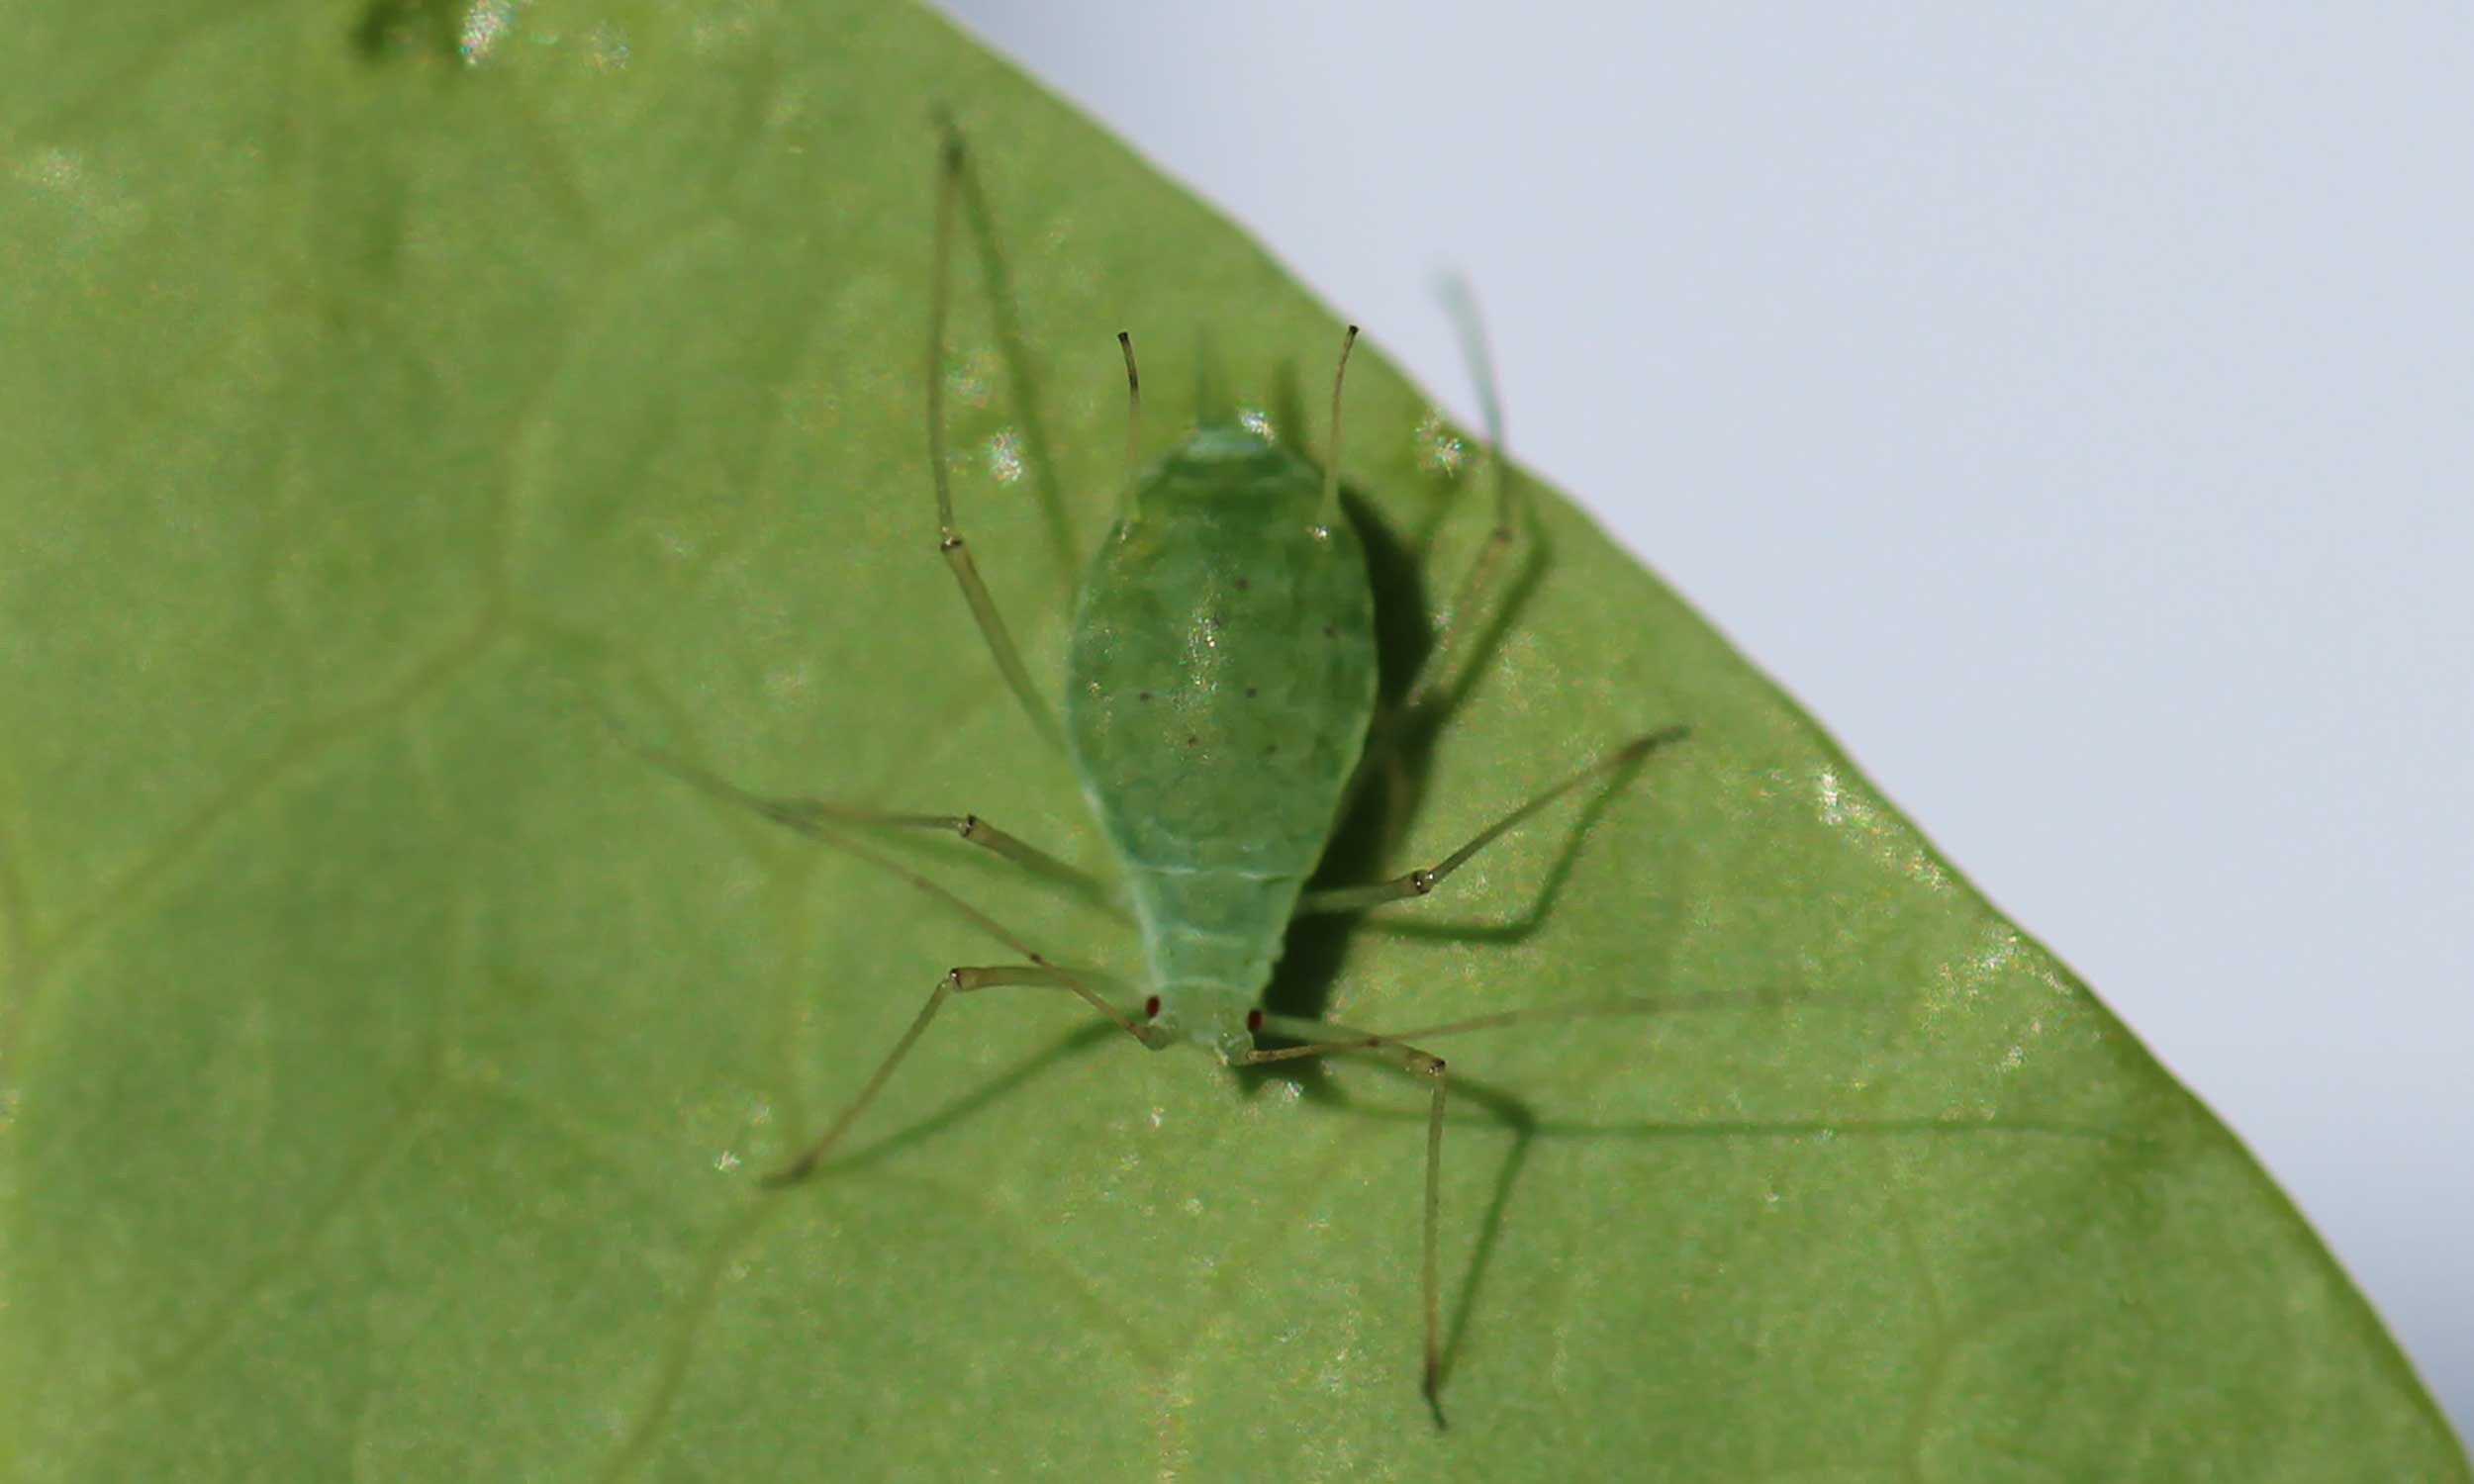 Green, teardrop shaped aphid present on a green leaf.